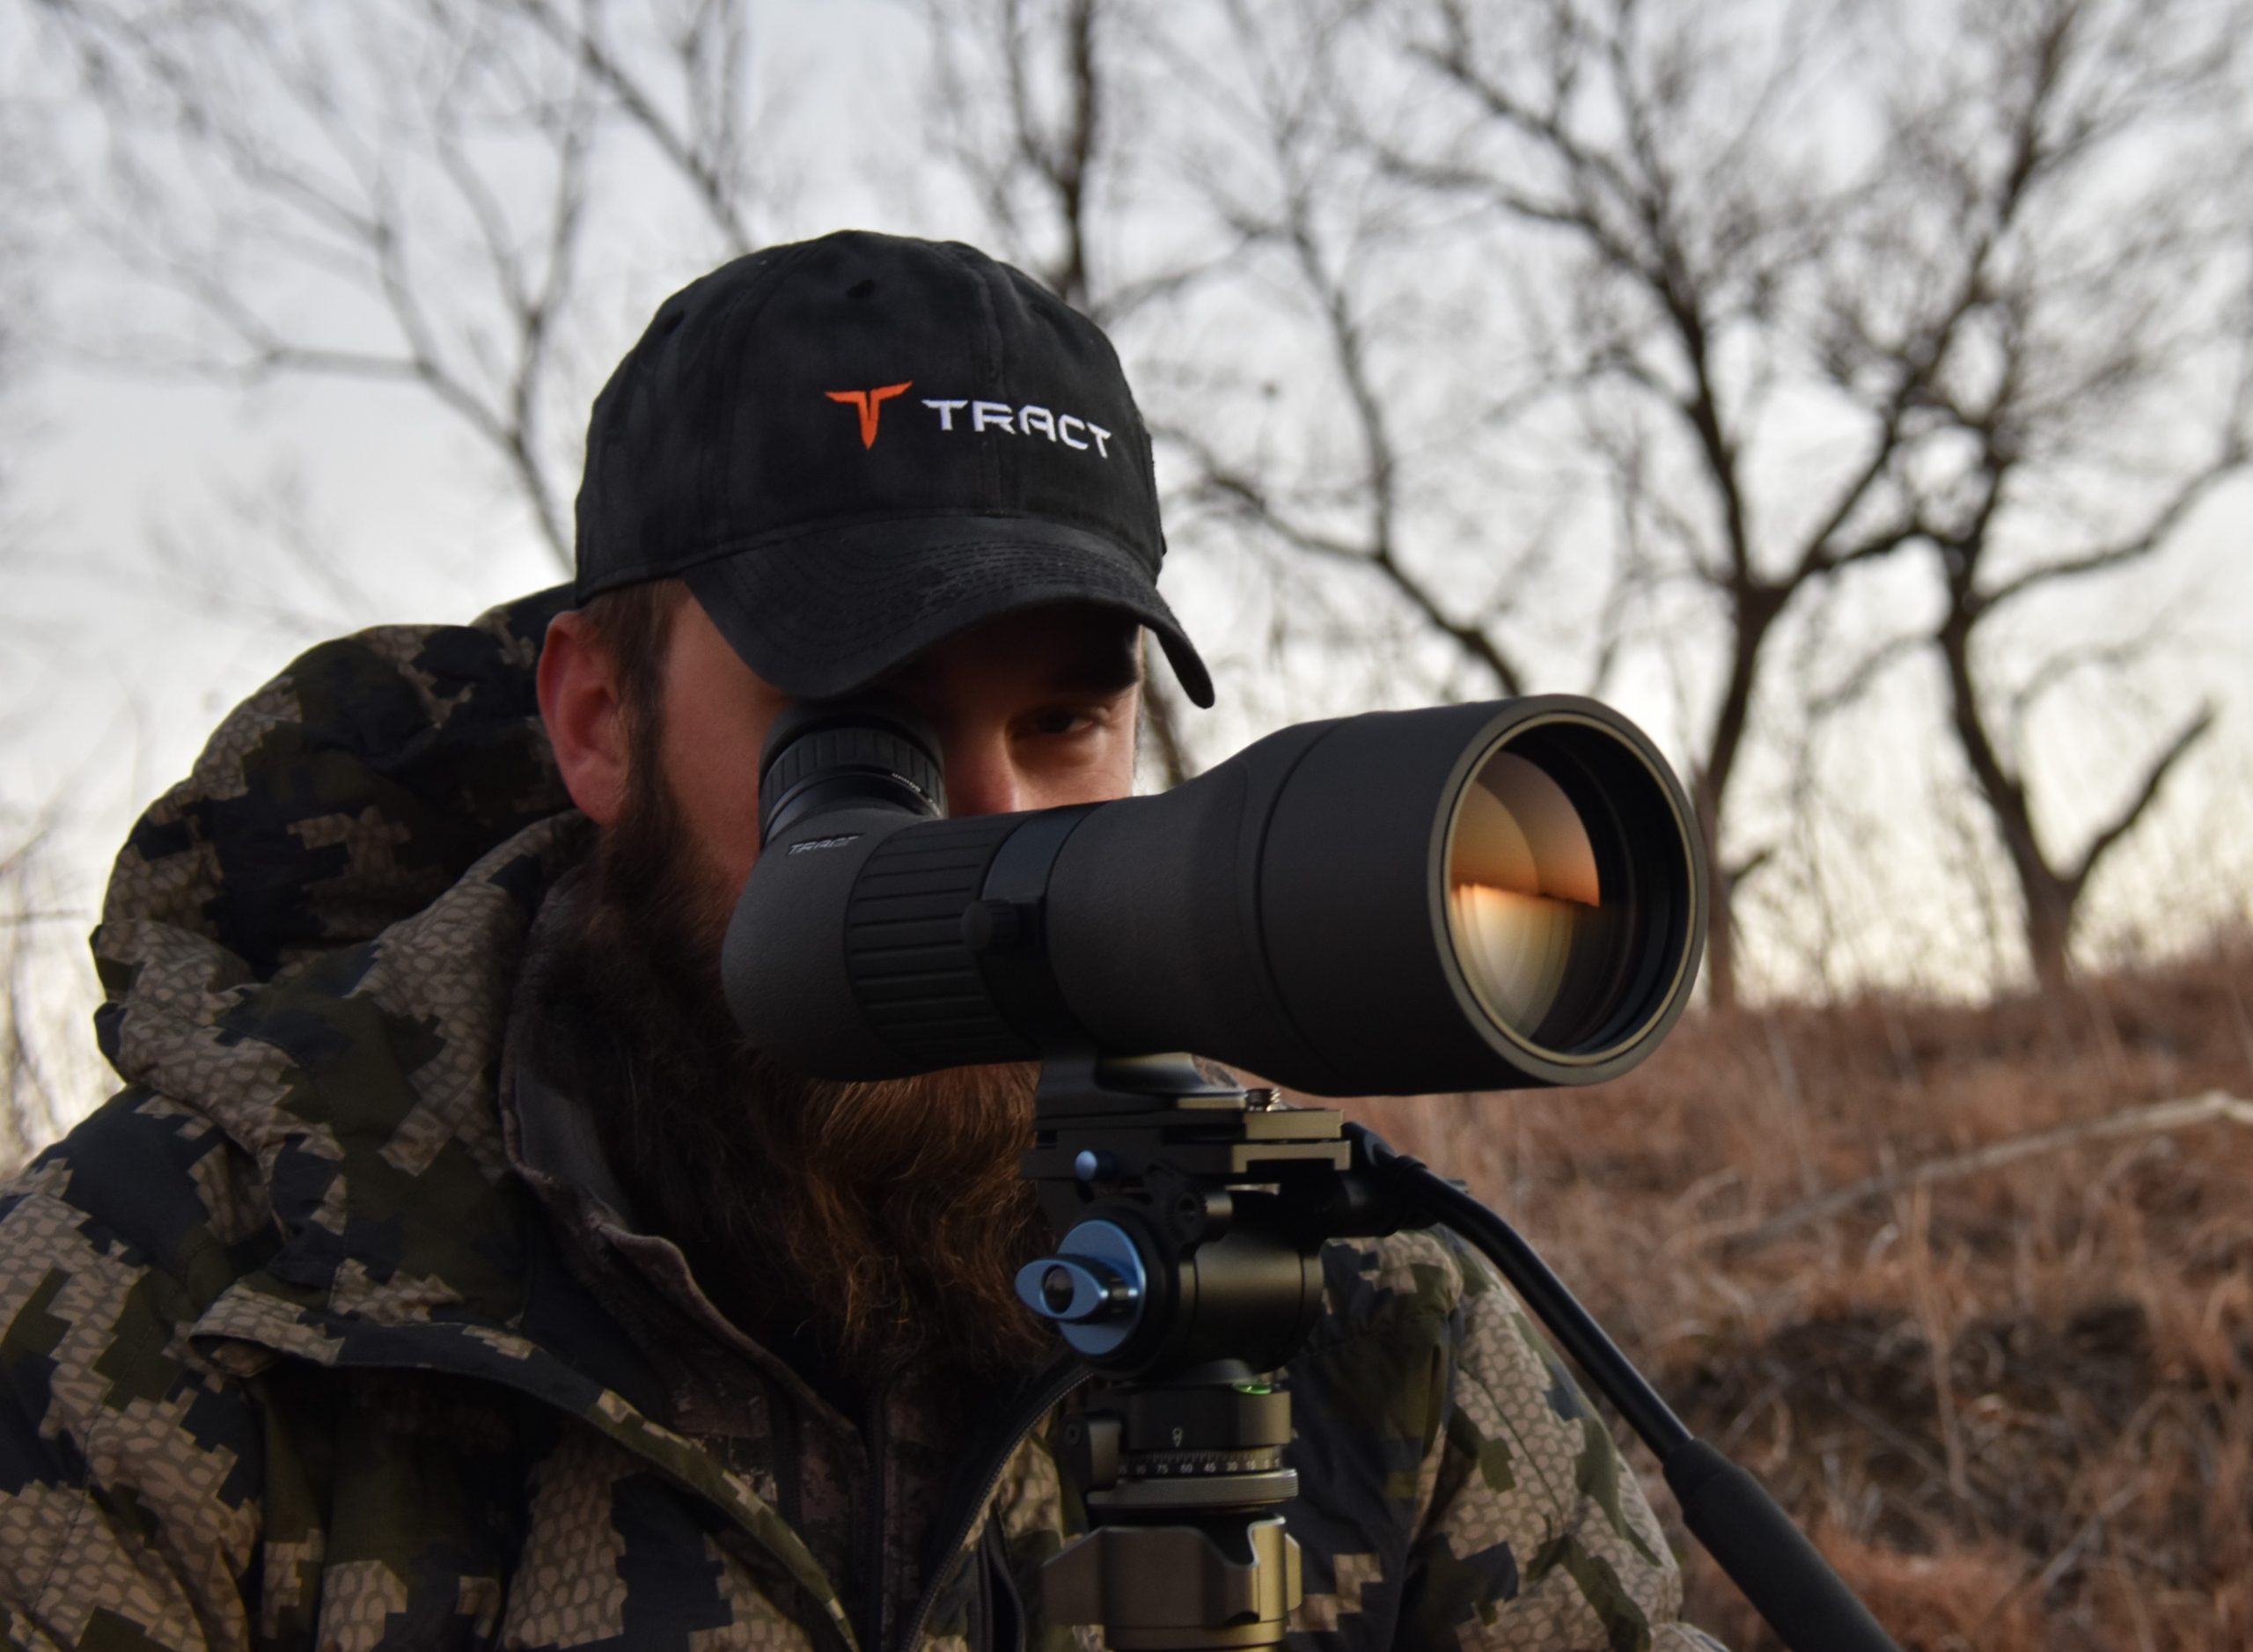 5 Reasons to Own a Spotting Scope